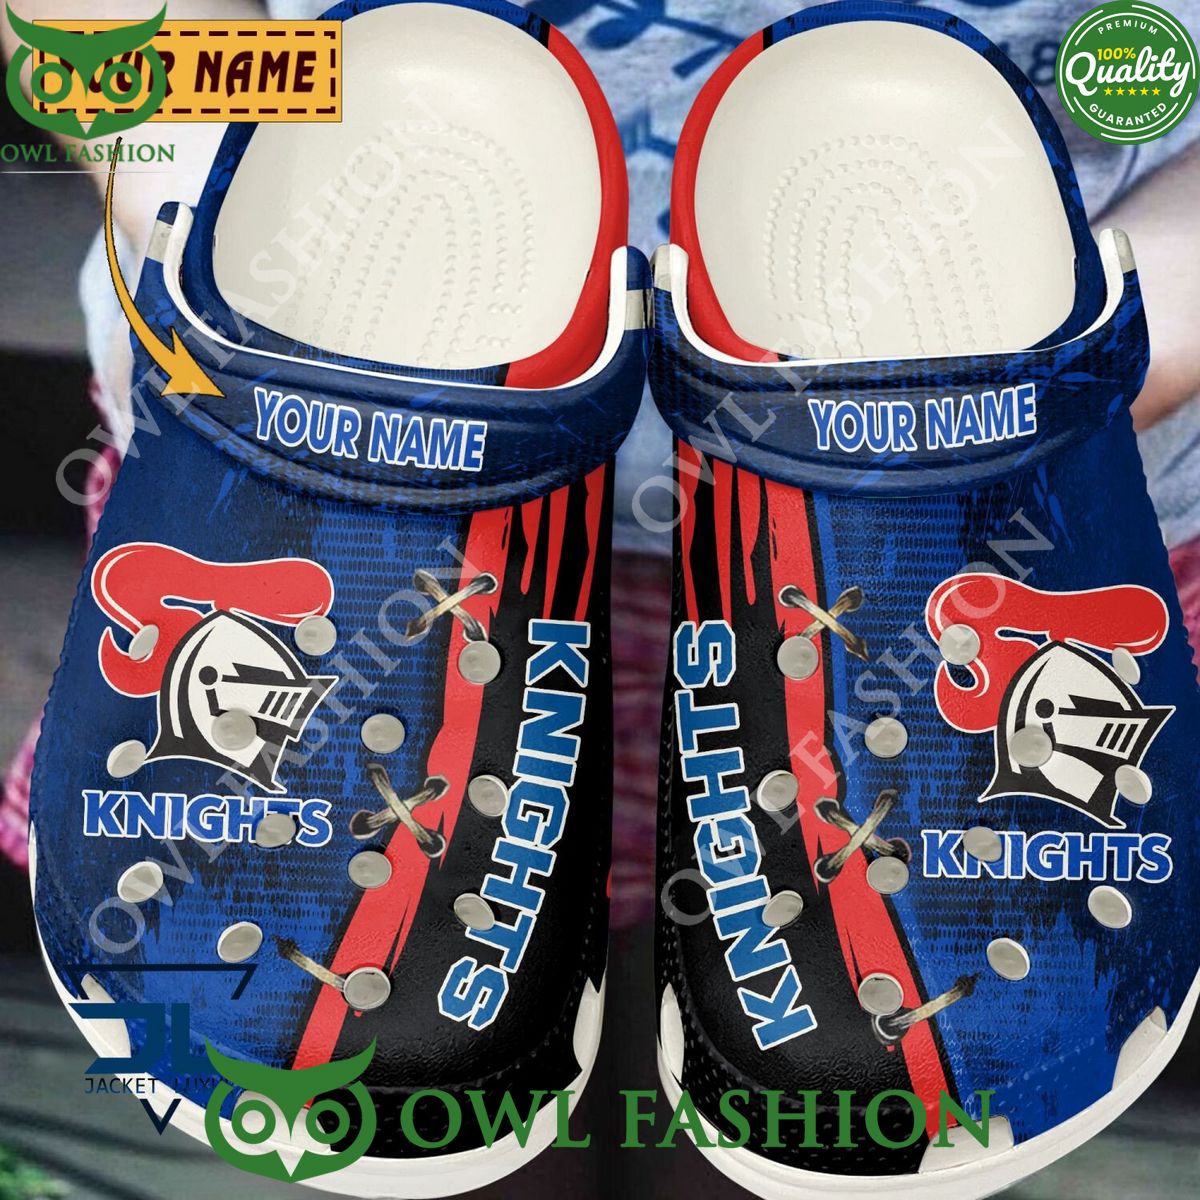 Newcastle Knights Personalized Rugby League Crocs